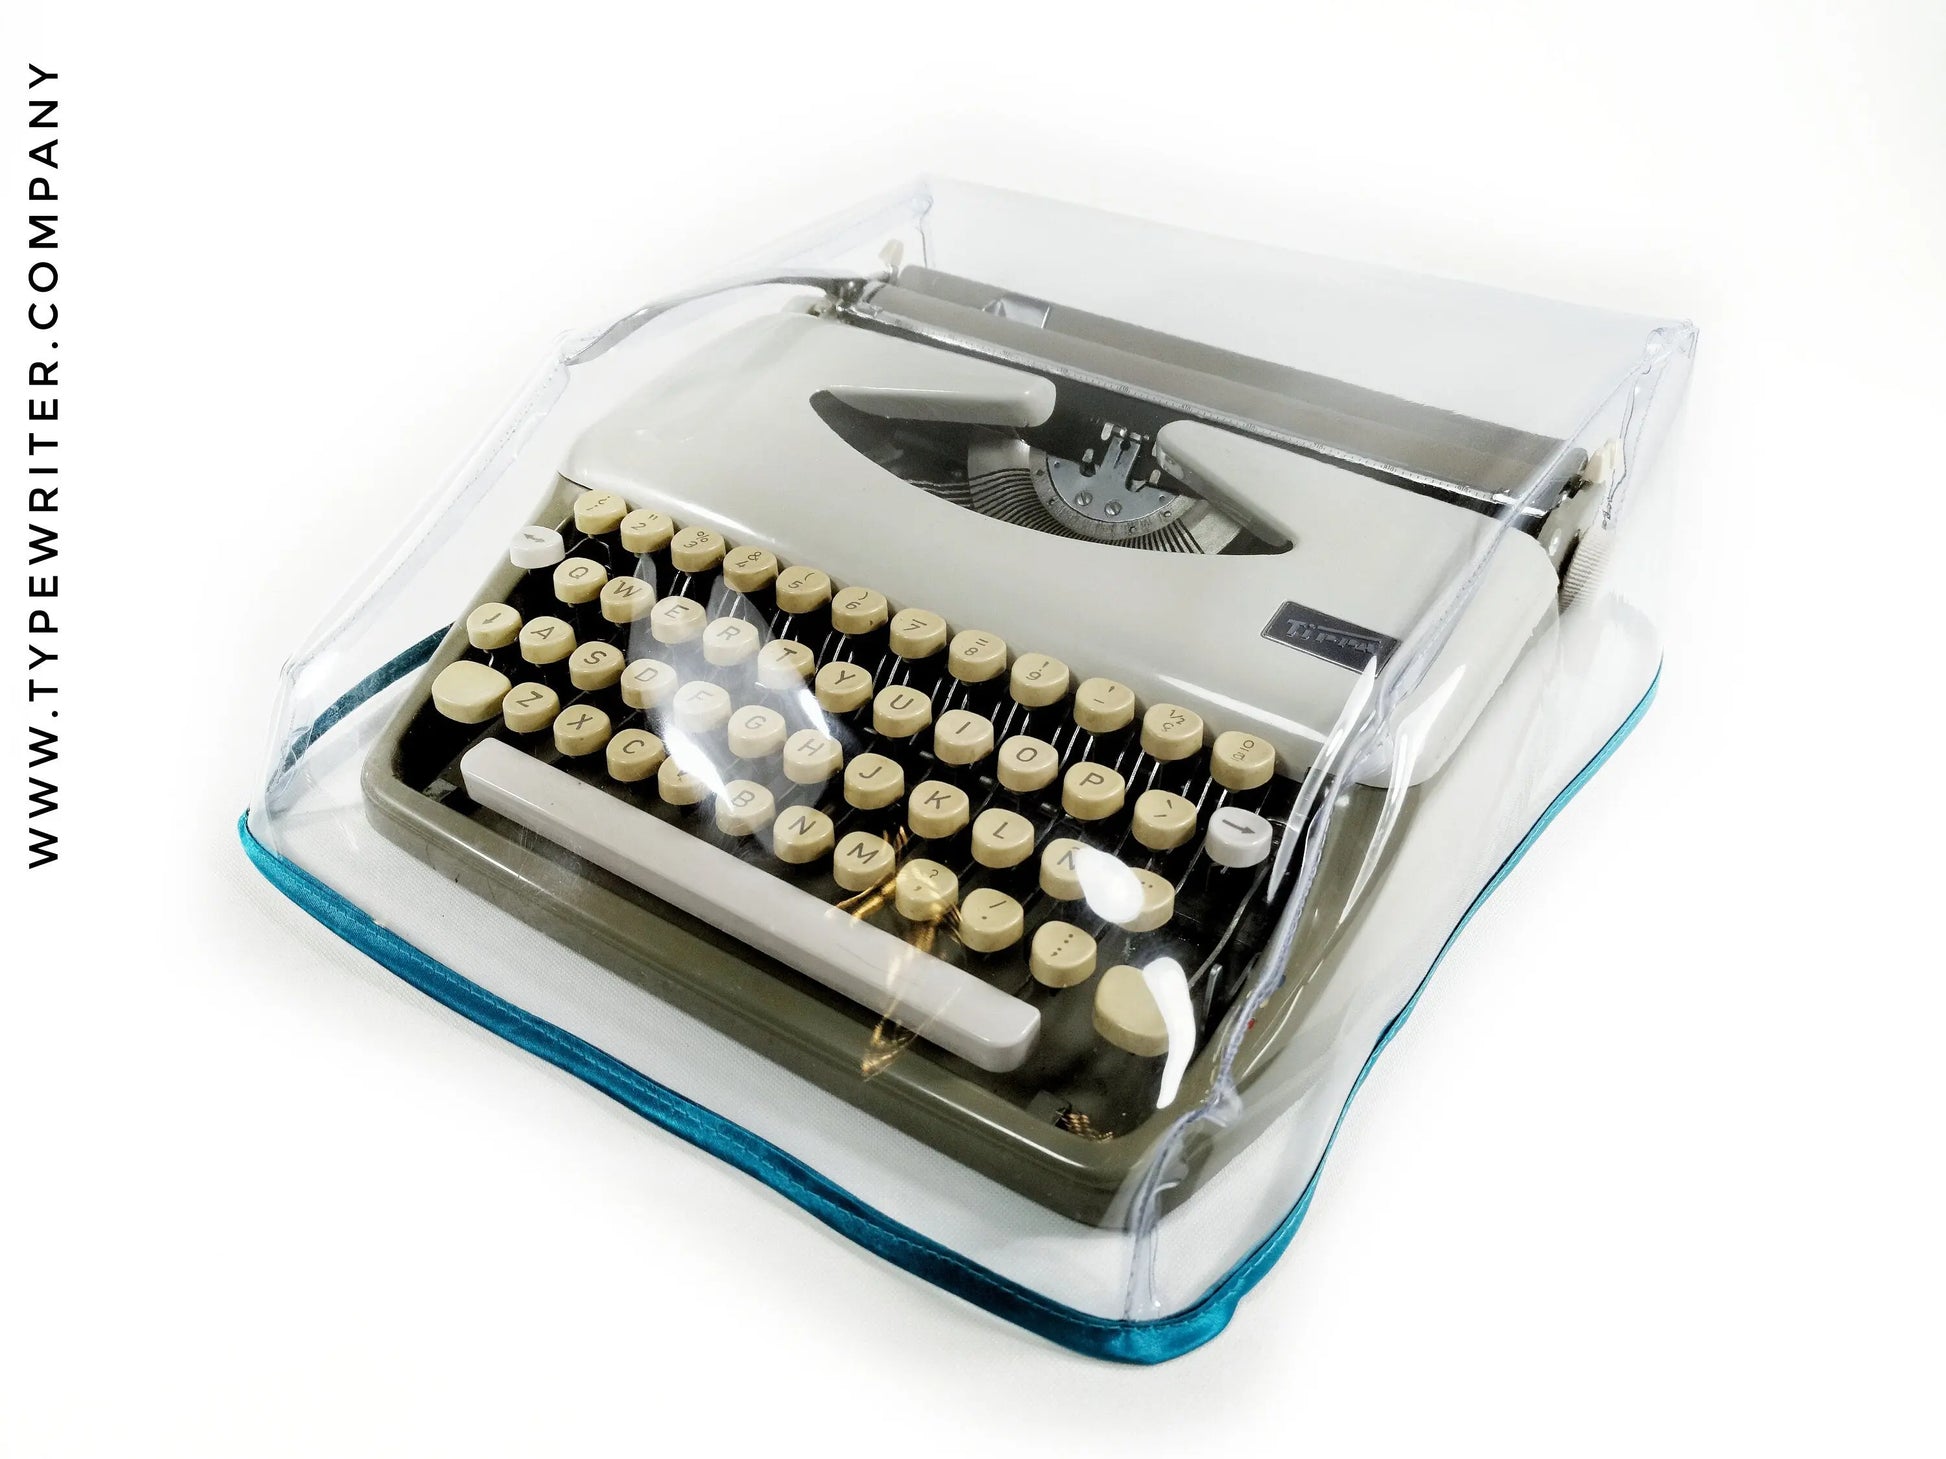 SMALL Transparent Dust Cover, Vinyl PVC for S size Manual Typewriter Adler, Triumph and Tippa - ElGranero Typewriter.Company